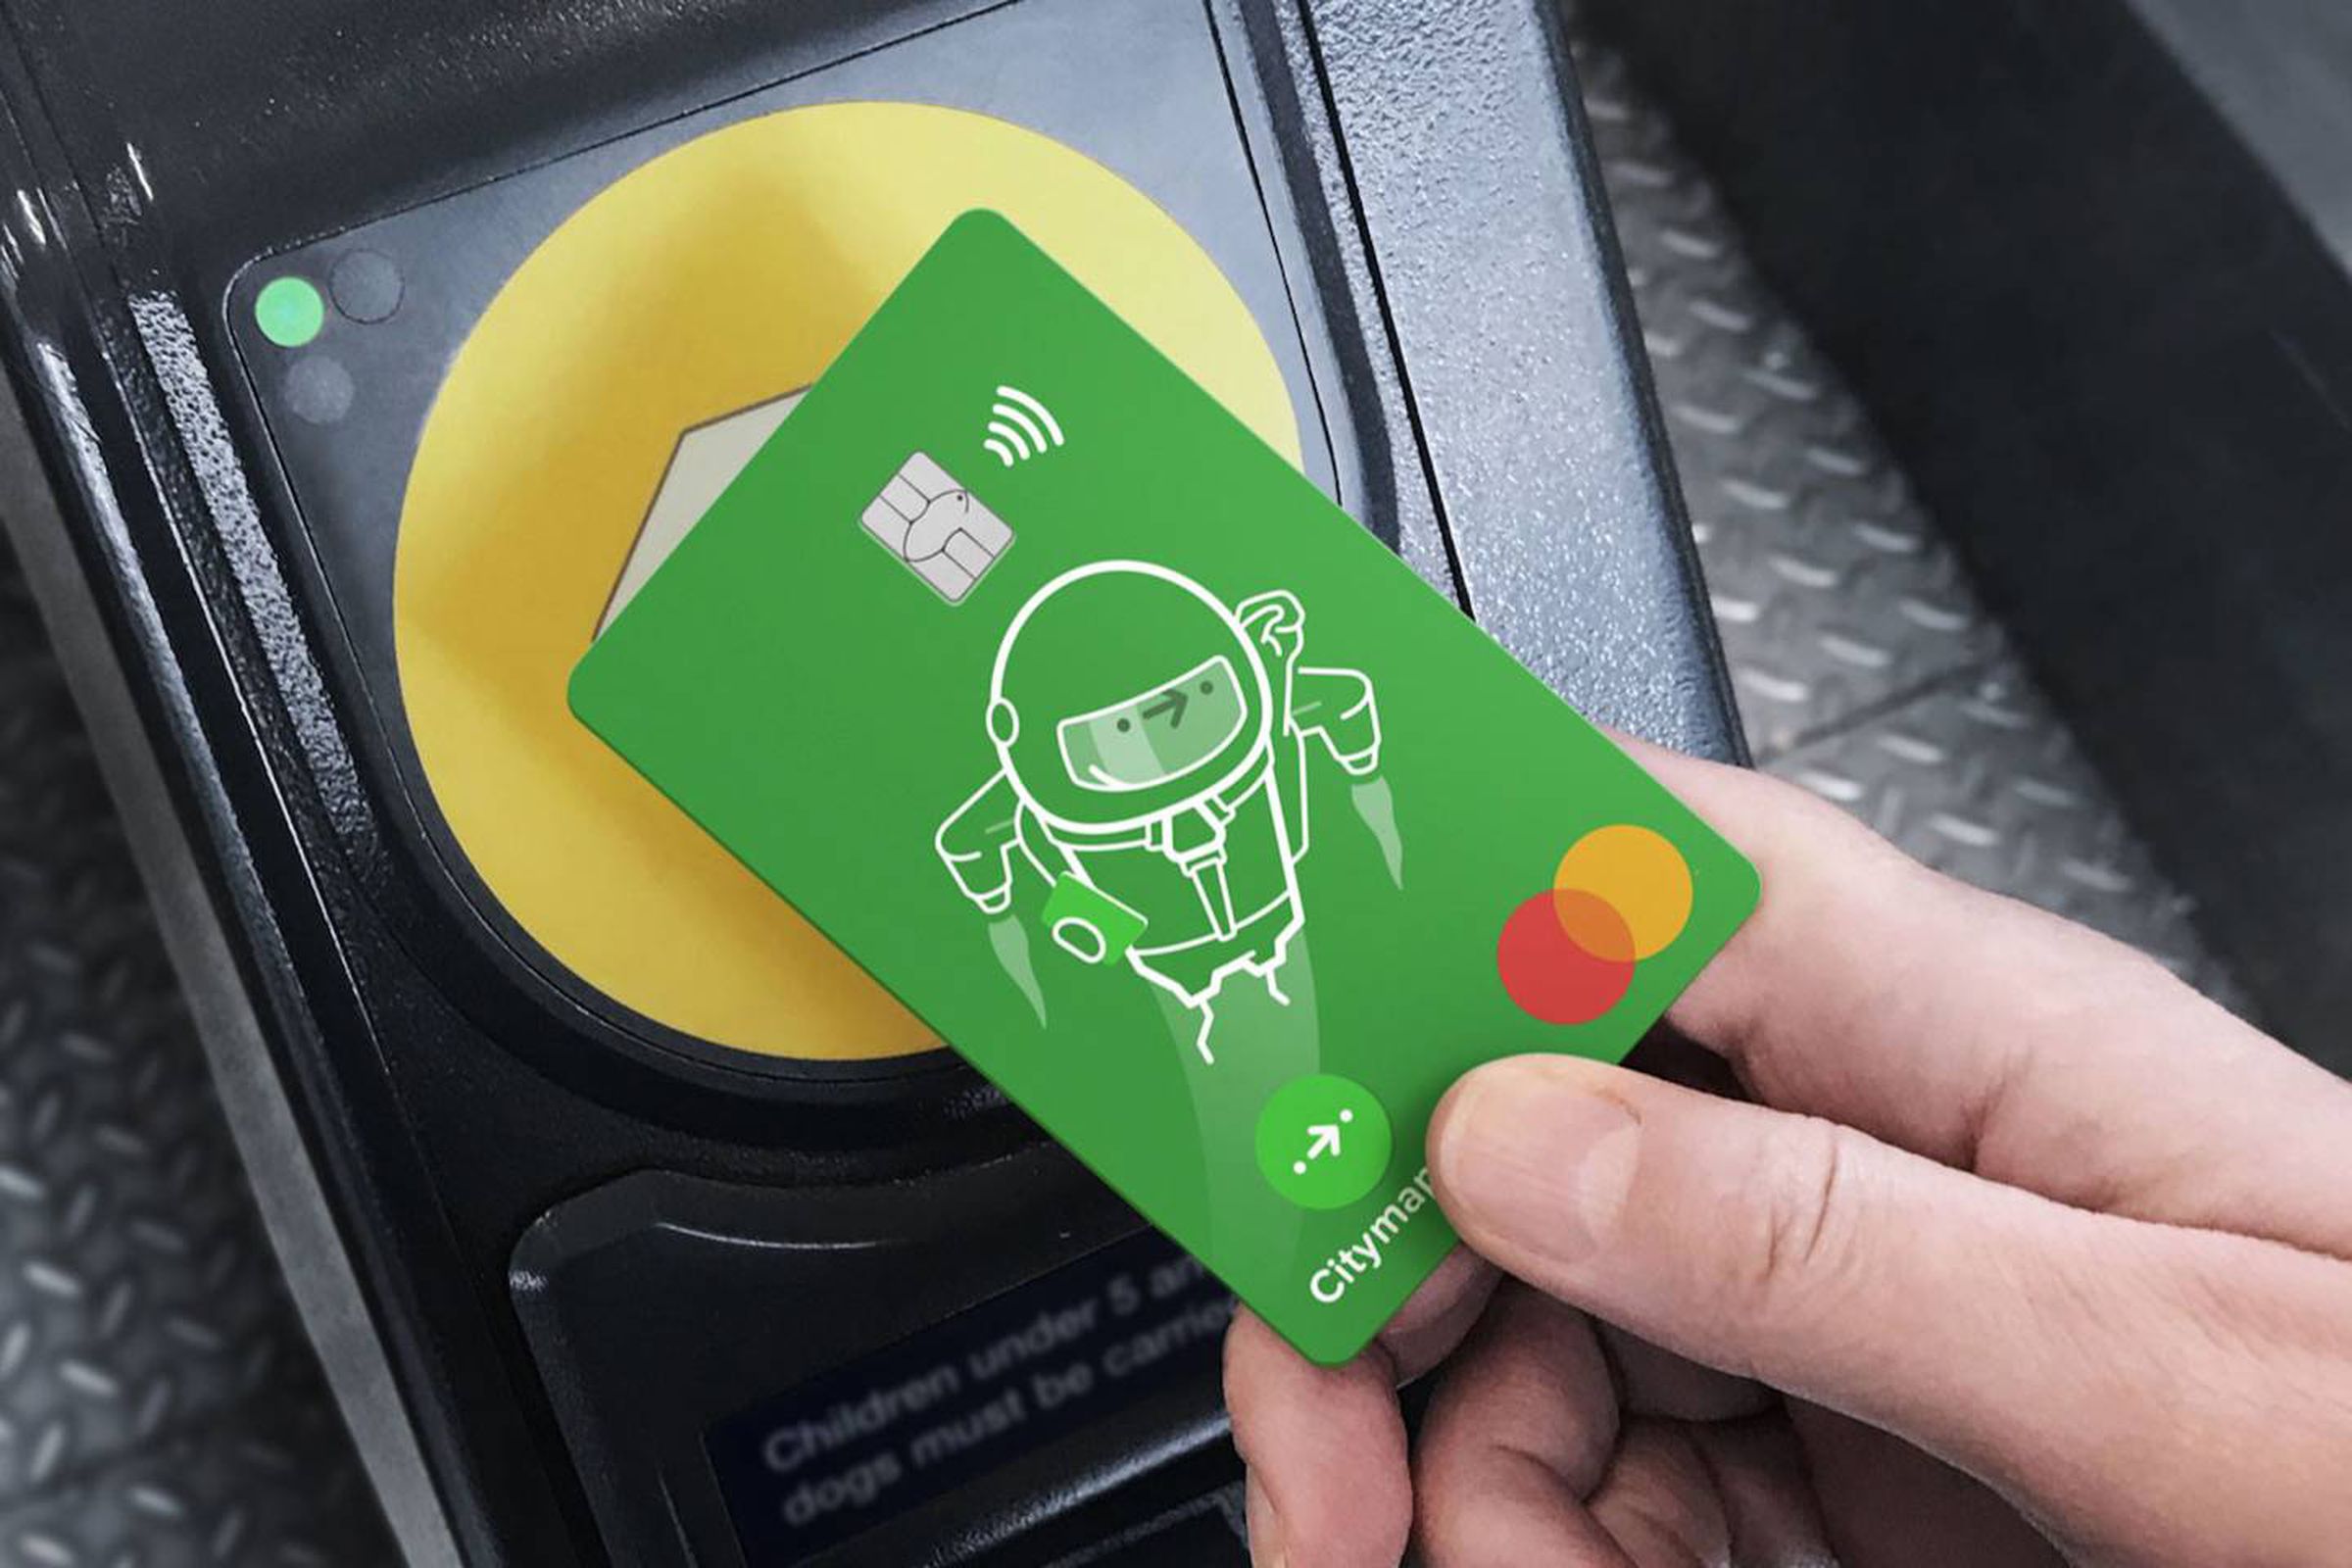 The new Citymapper Pass is a subscription service that works with London’s various transport options.